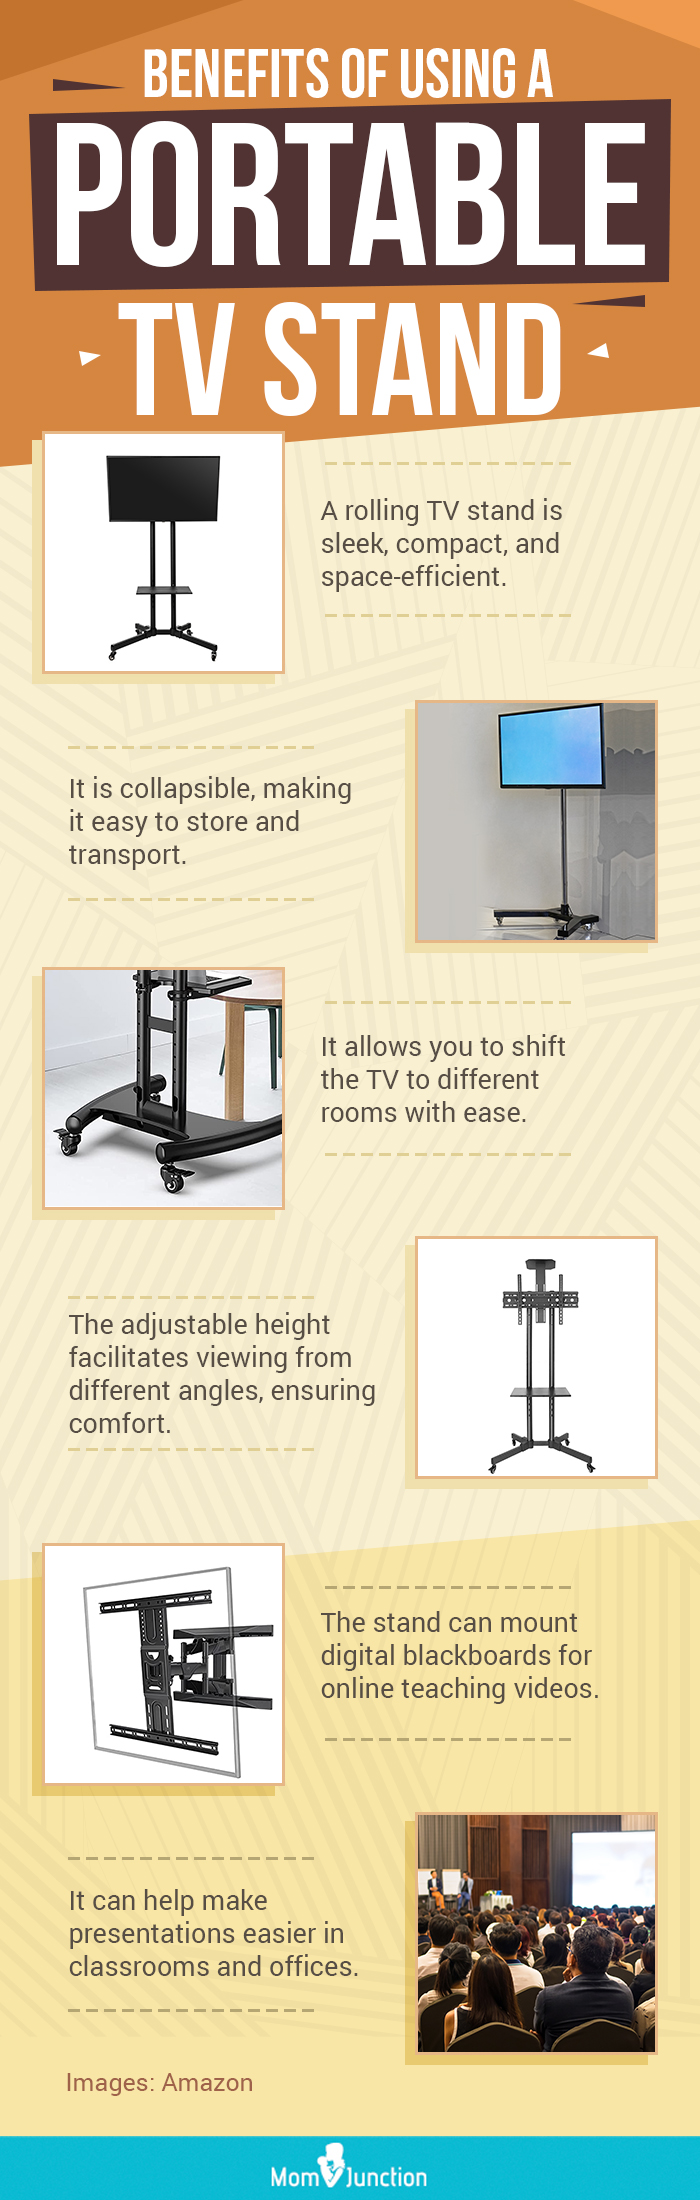 Benefits-Of-Using-A-Portable-TV-Stand (infographic)